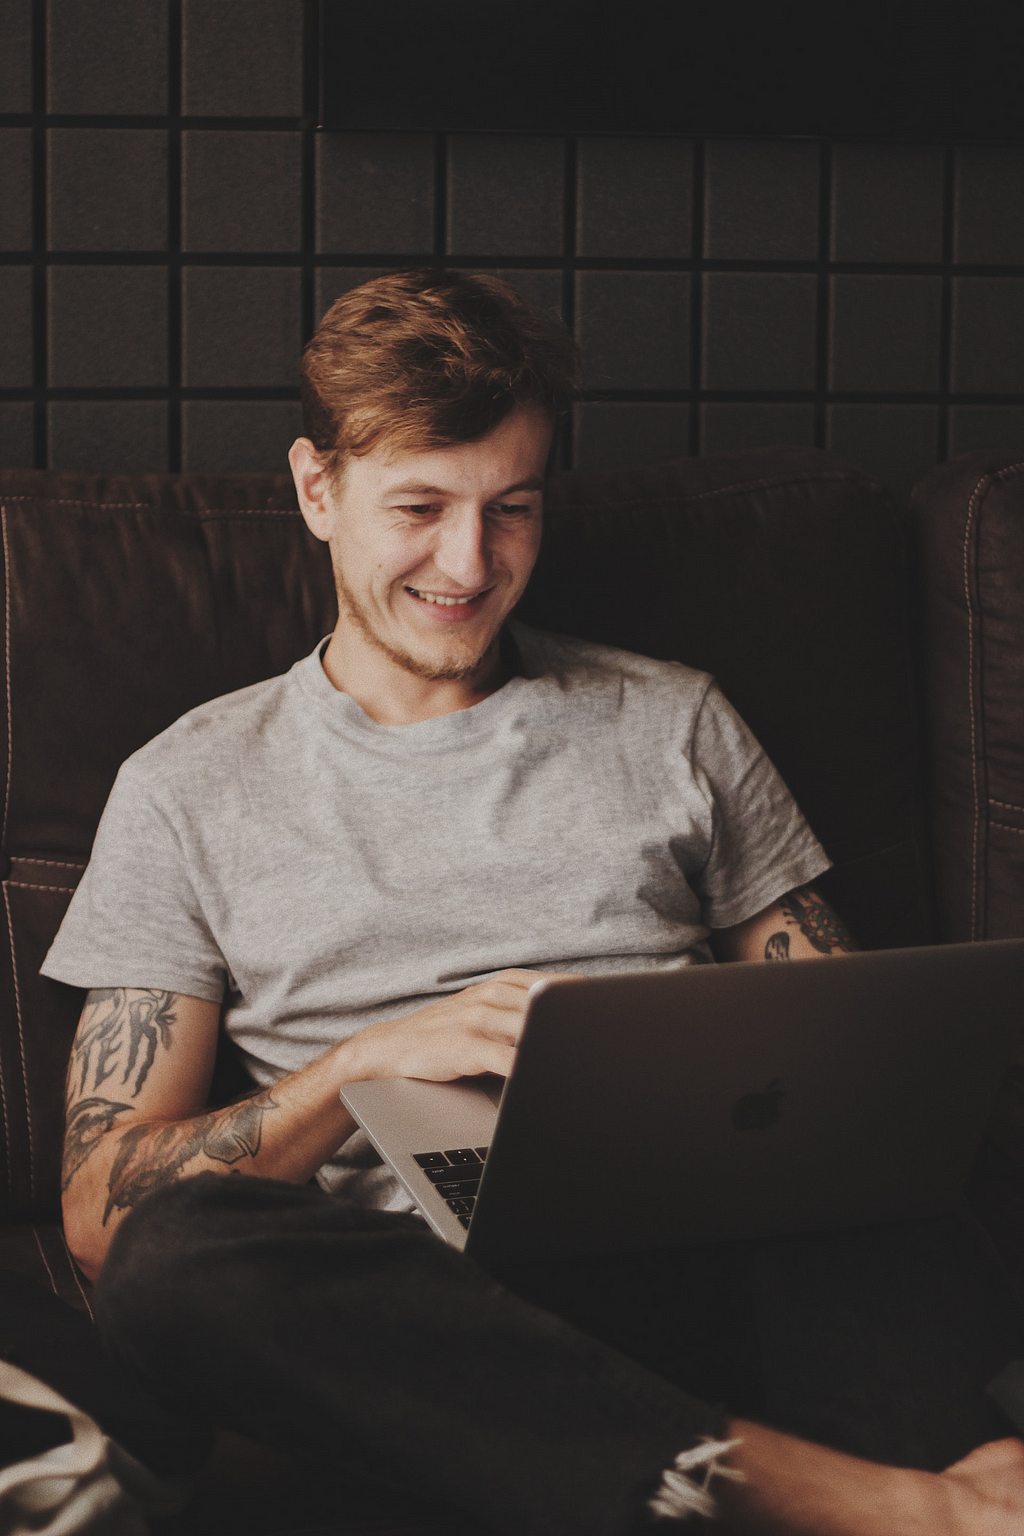 A young man sits and smiles while using his laptop.